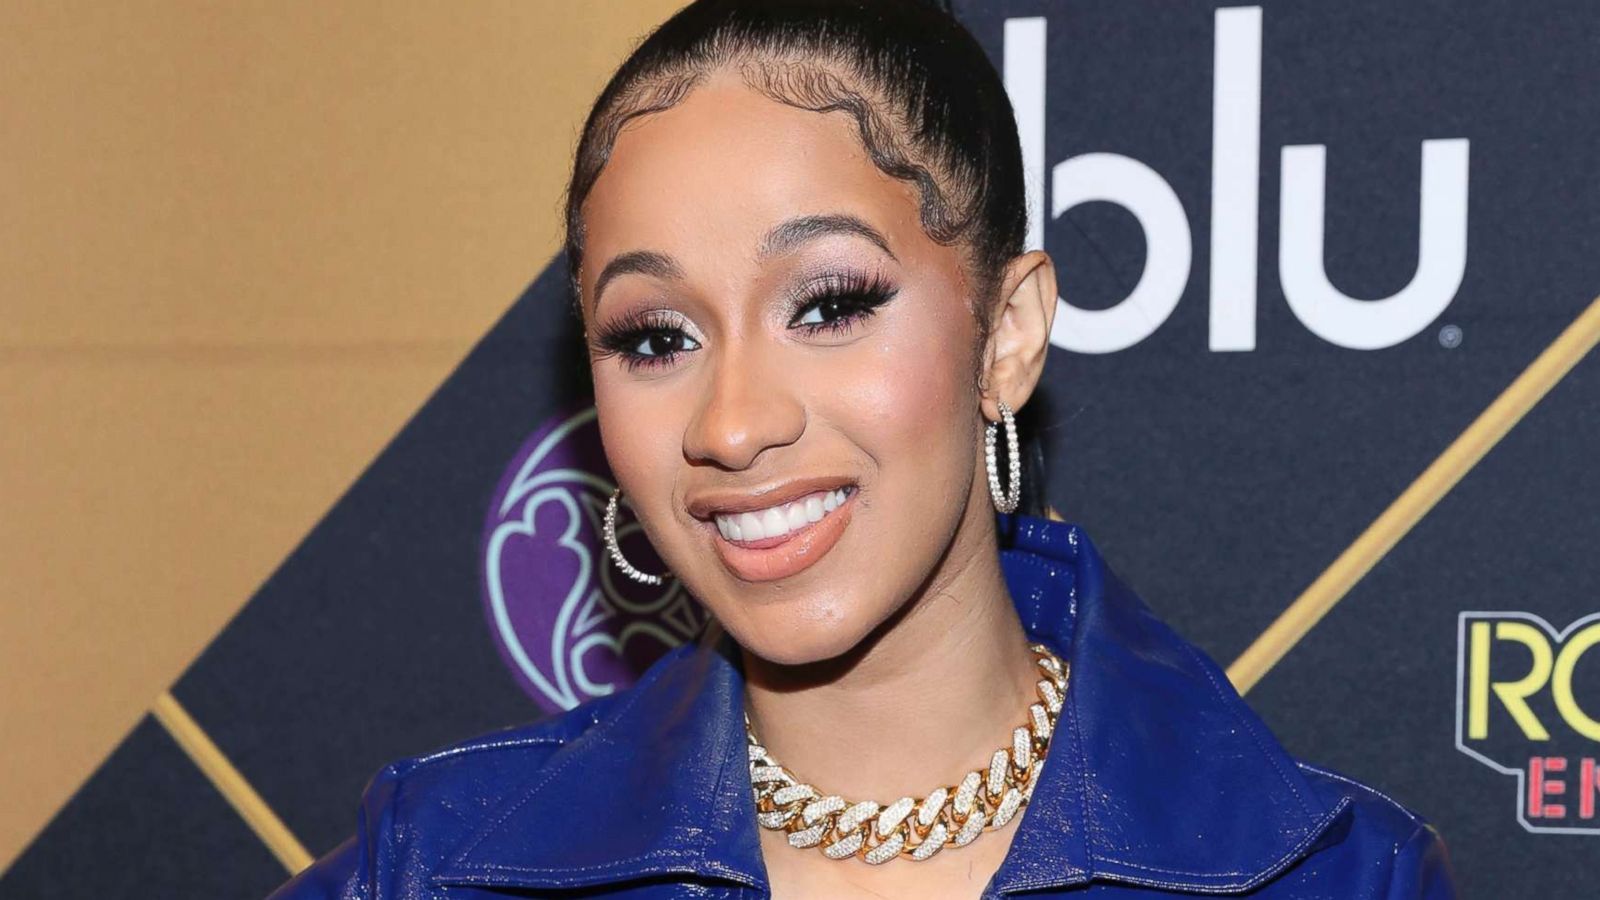 Cardi B pulls out of world tour post baby: 'I underestimated this whole mommy thing'